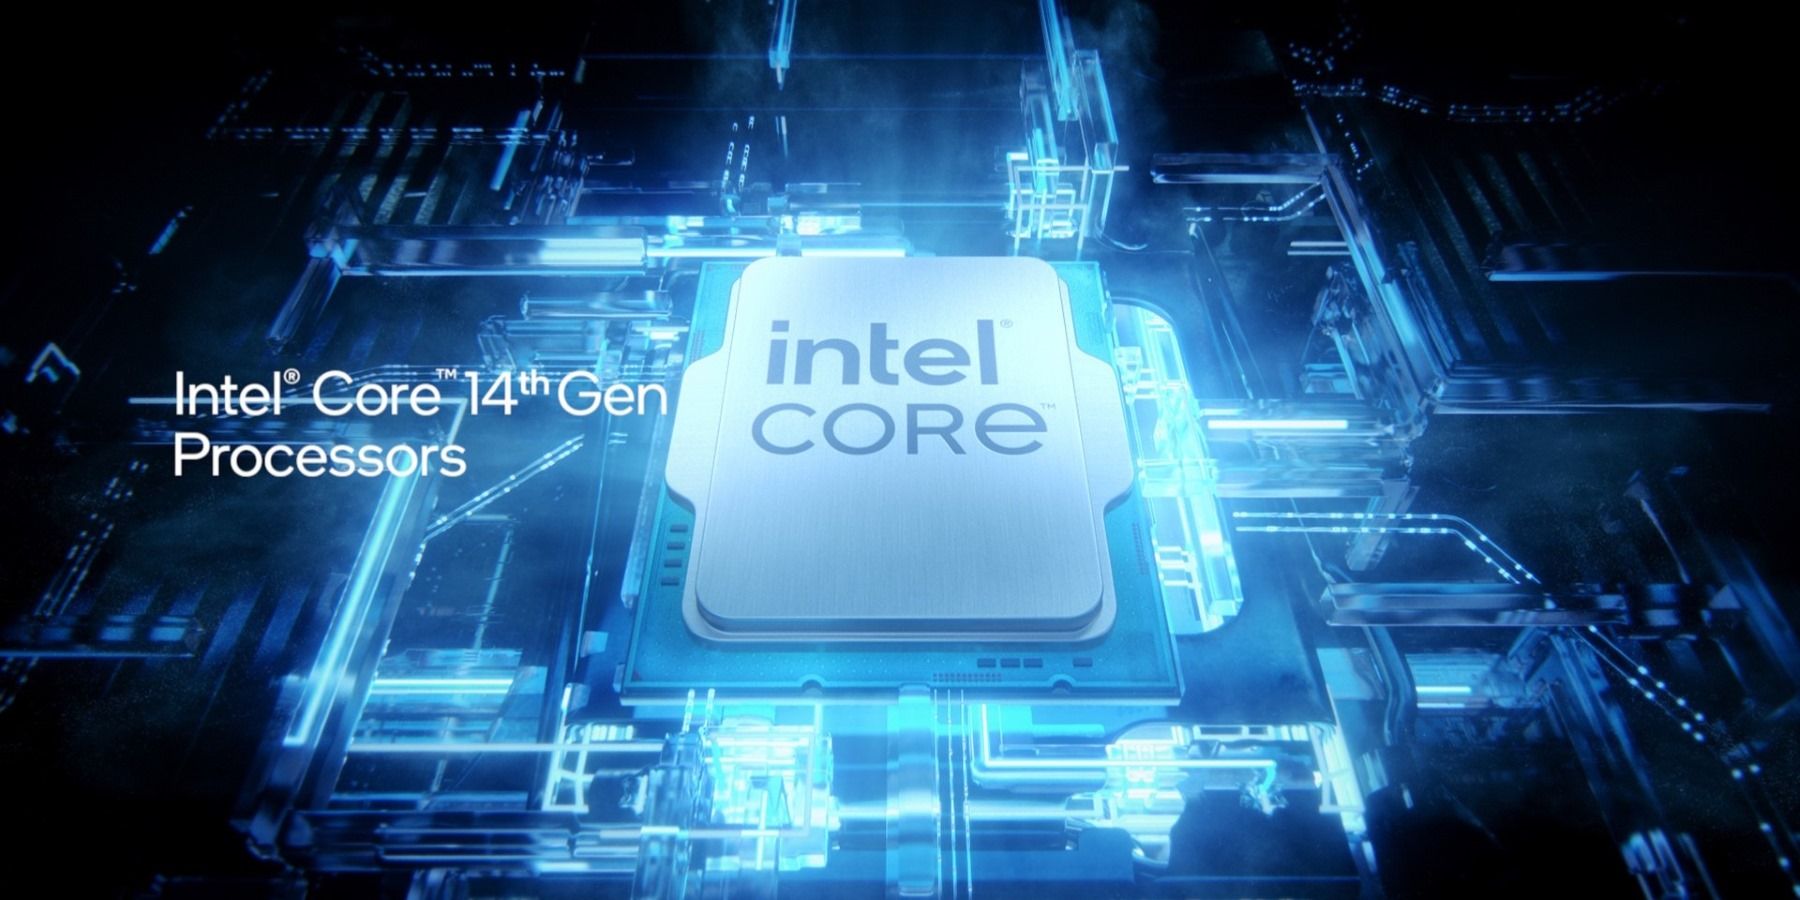 Intel introduces new 9th generation Core i9 processor for desktop gaming